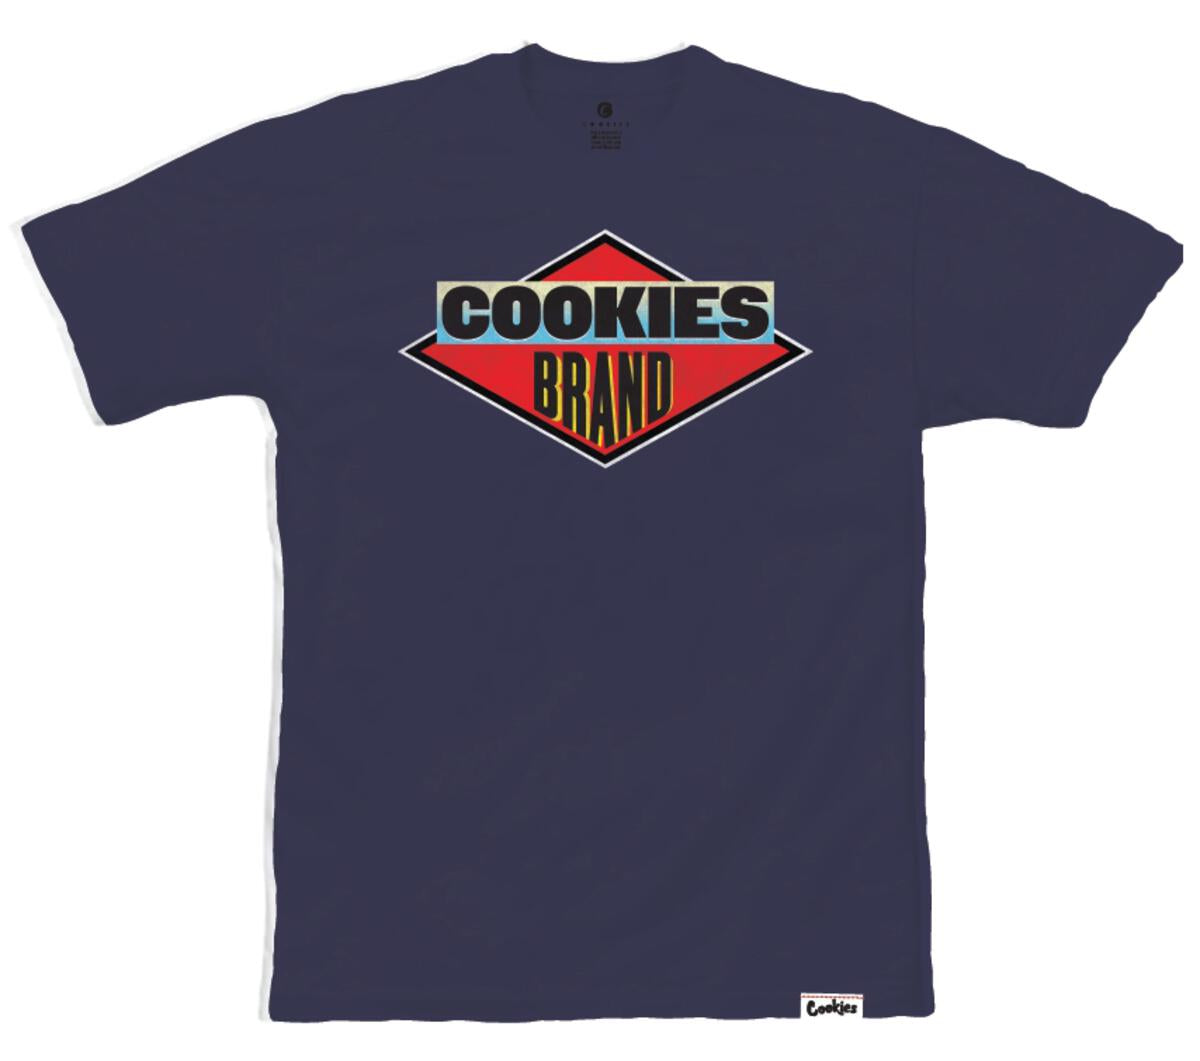 License To Chief SS Tee (NAVY)